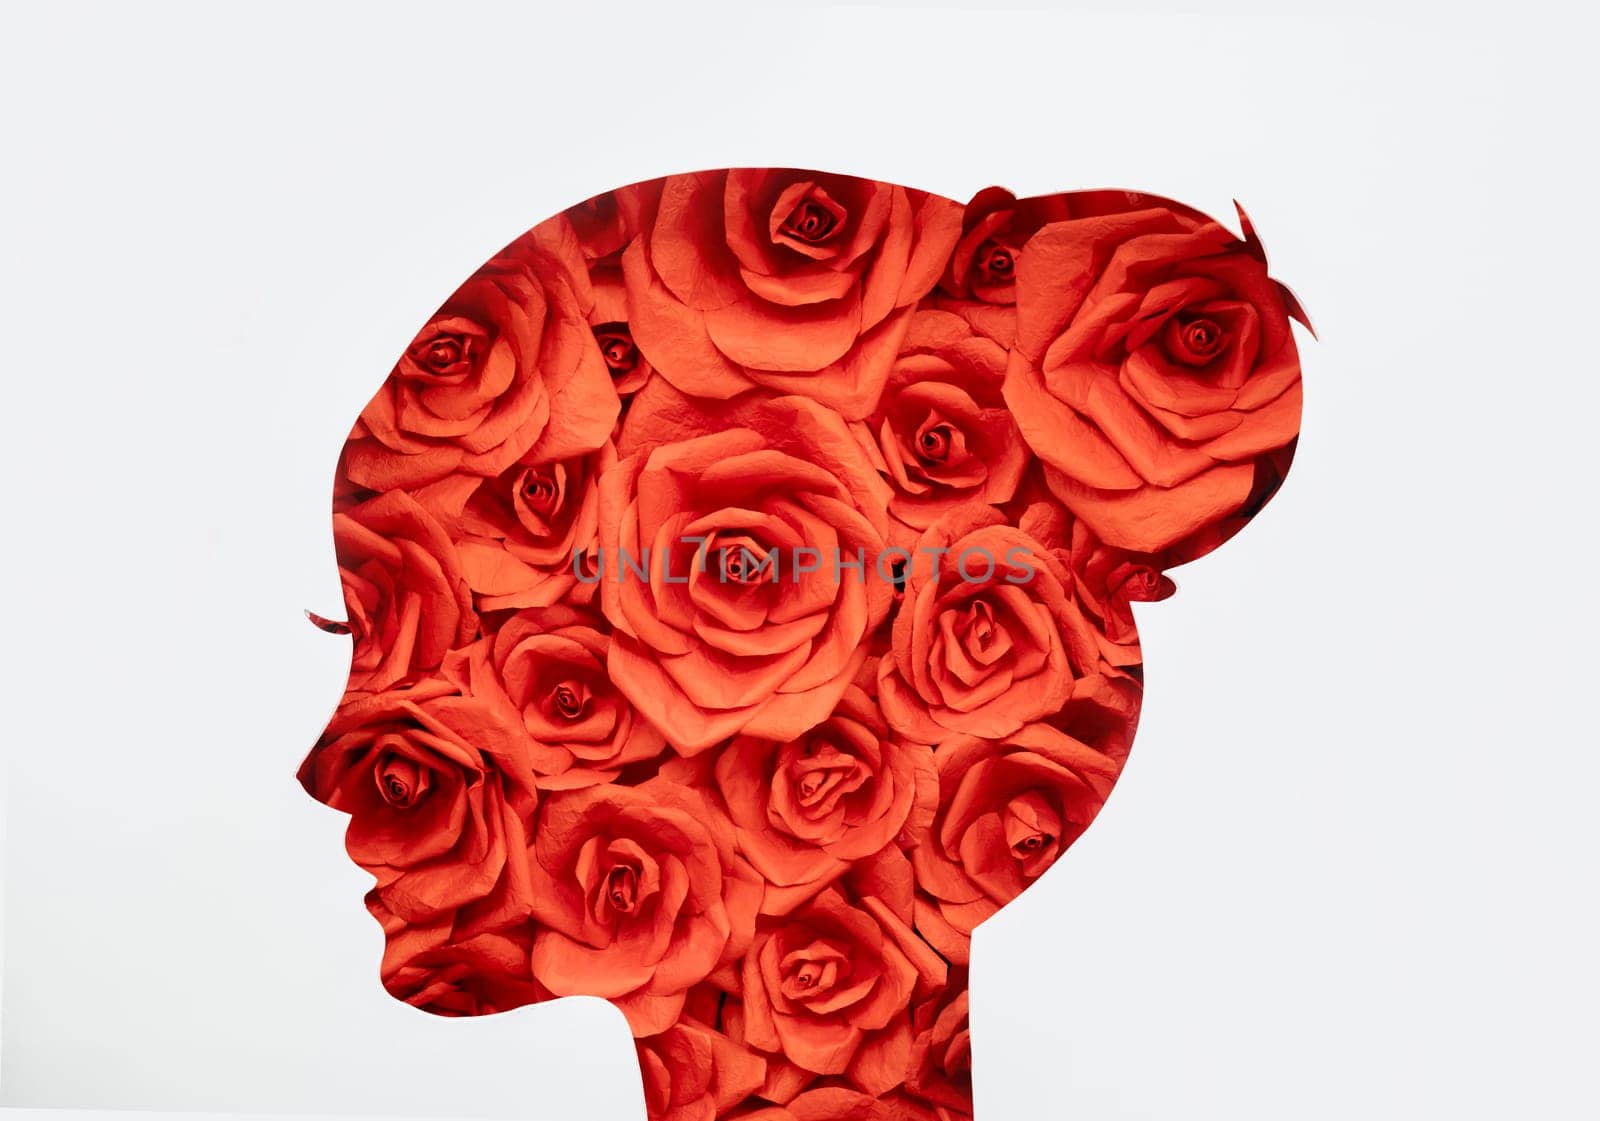 Greeting Card International Women's Day on March 8th. many flowers roses in hole of woman silhouette. March 8th concept. by igor010